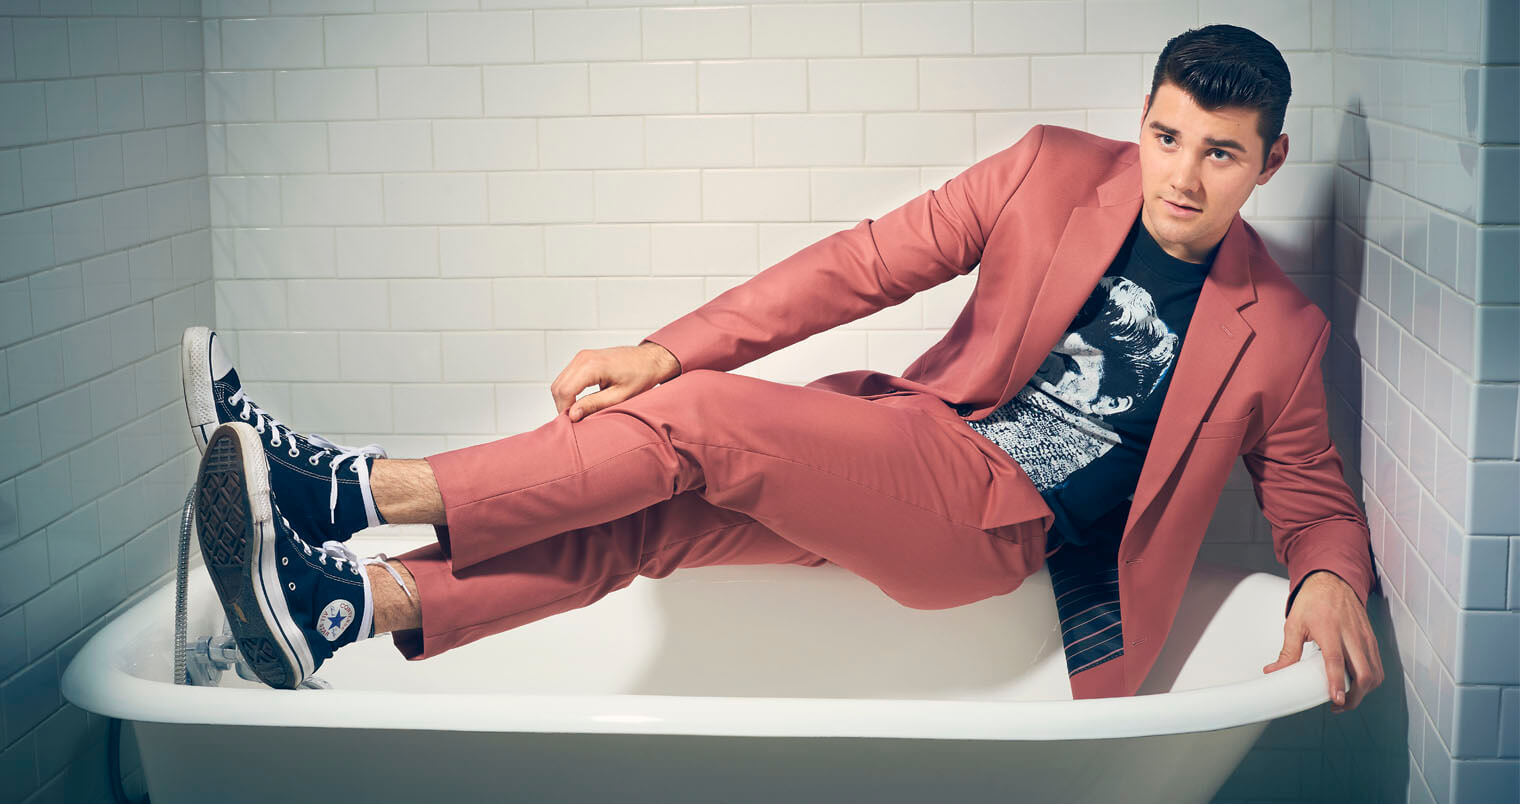 Chillin' with JT Neal, bathtub, pink suit, featured image